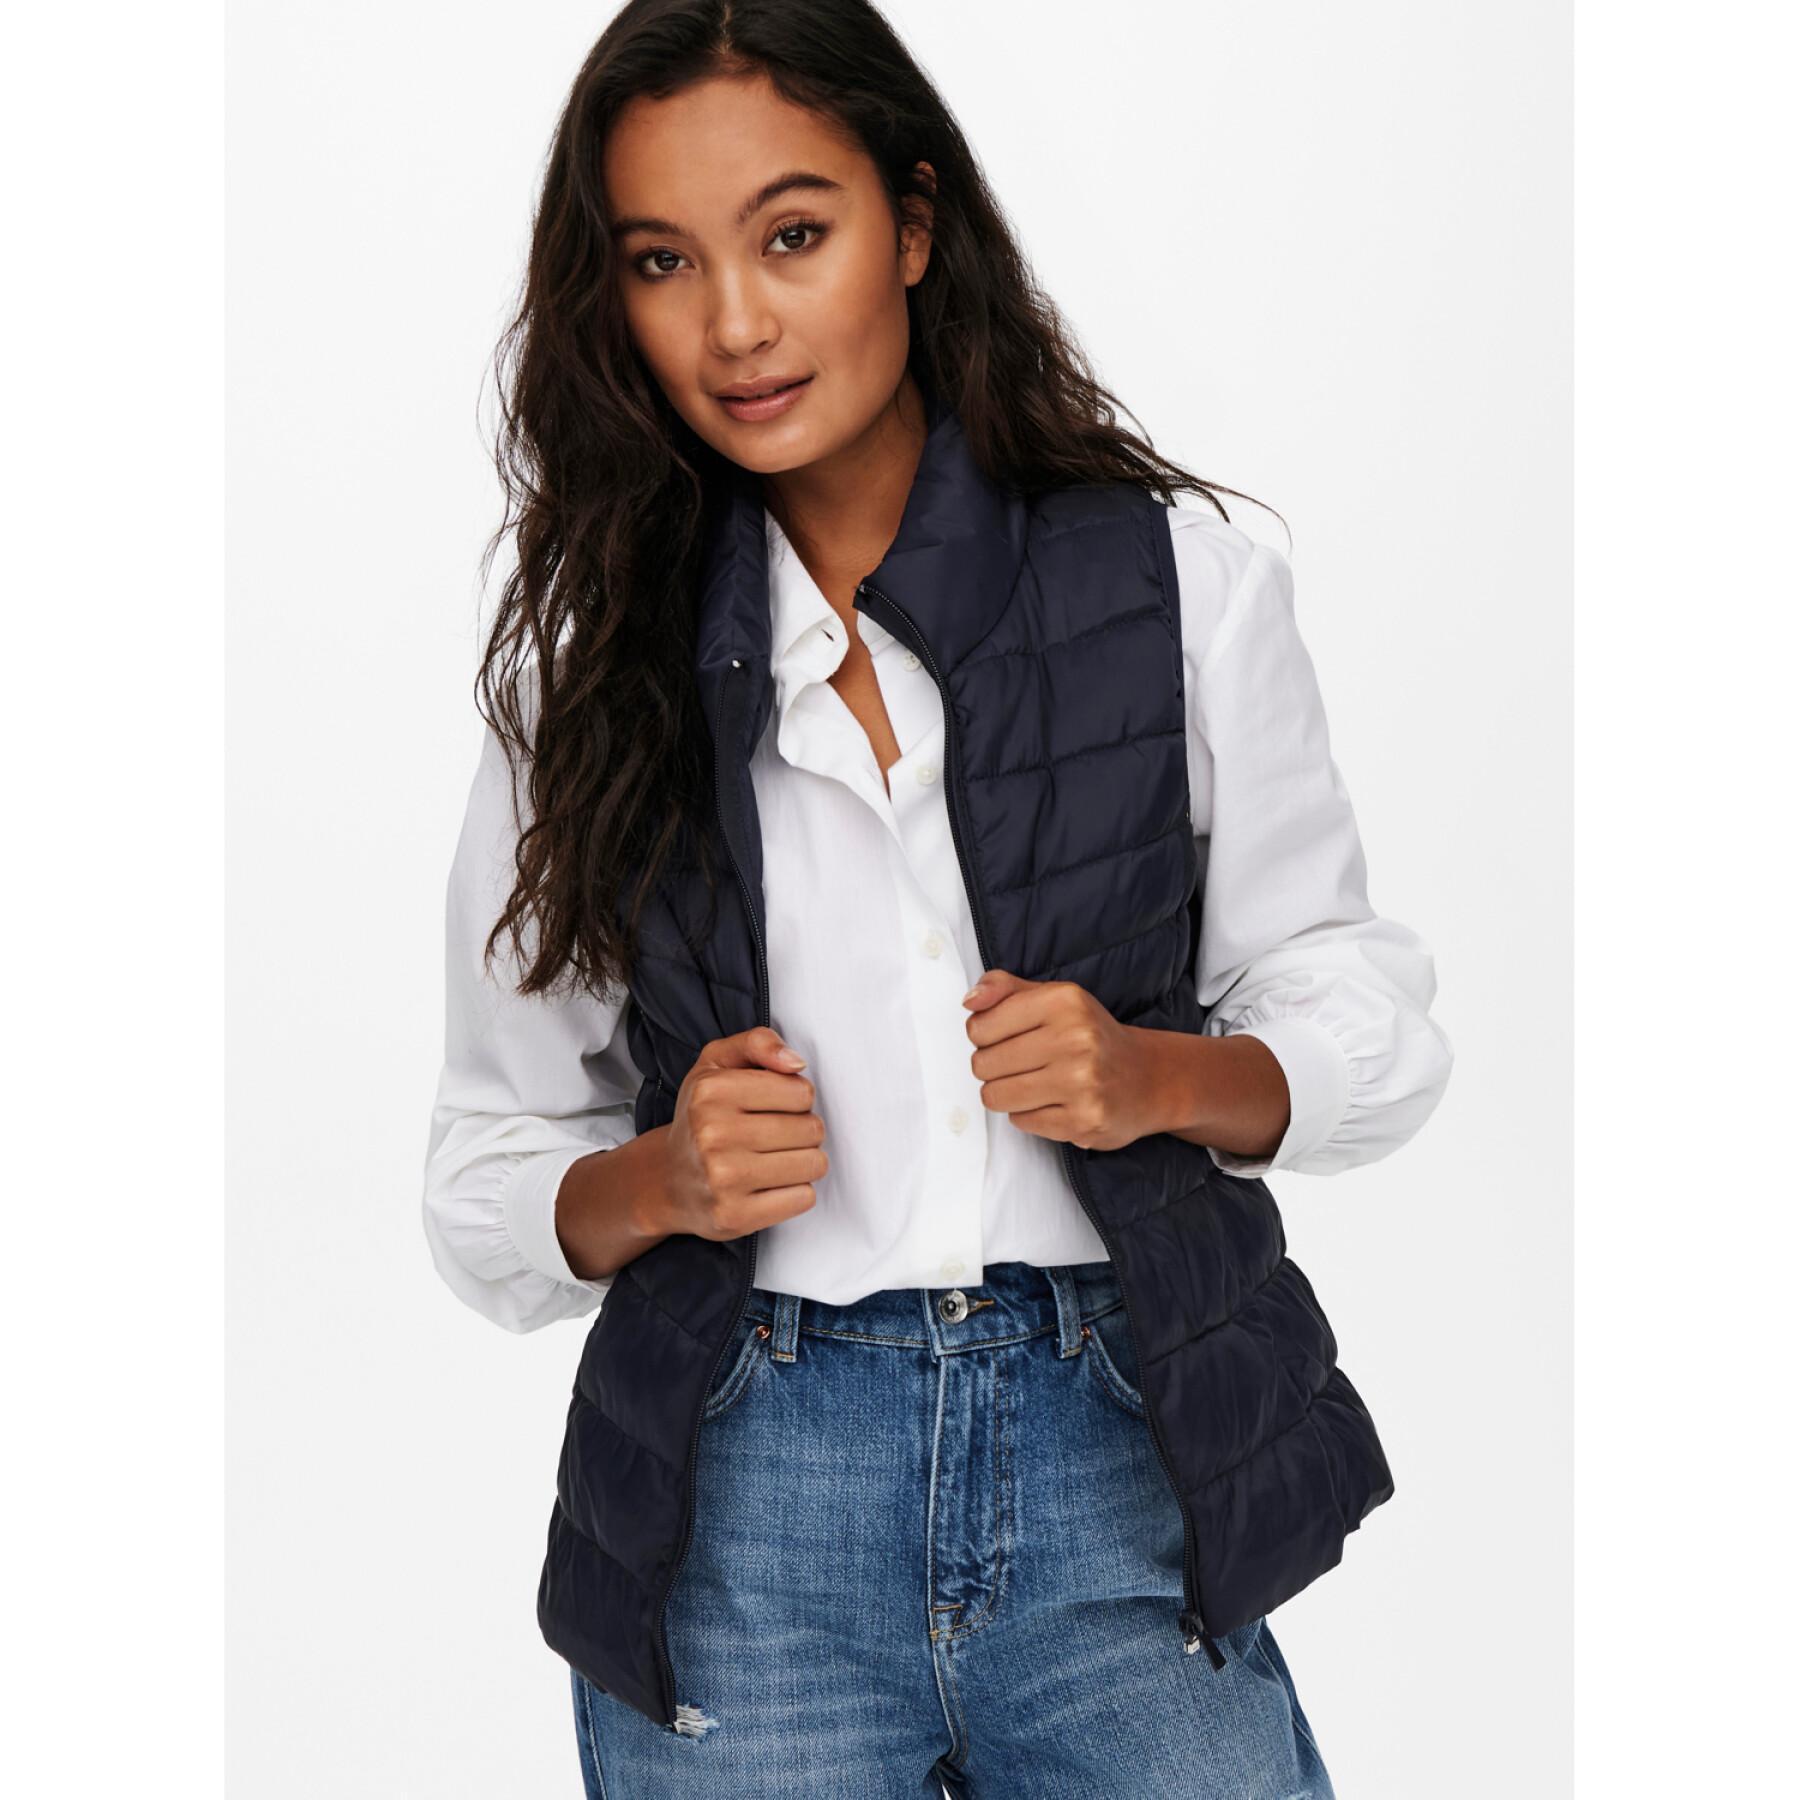 Women's vest Only Onlnewclaire Quilted